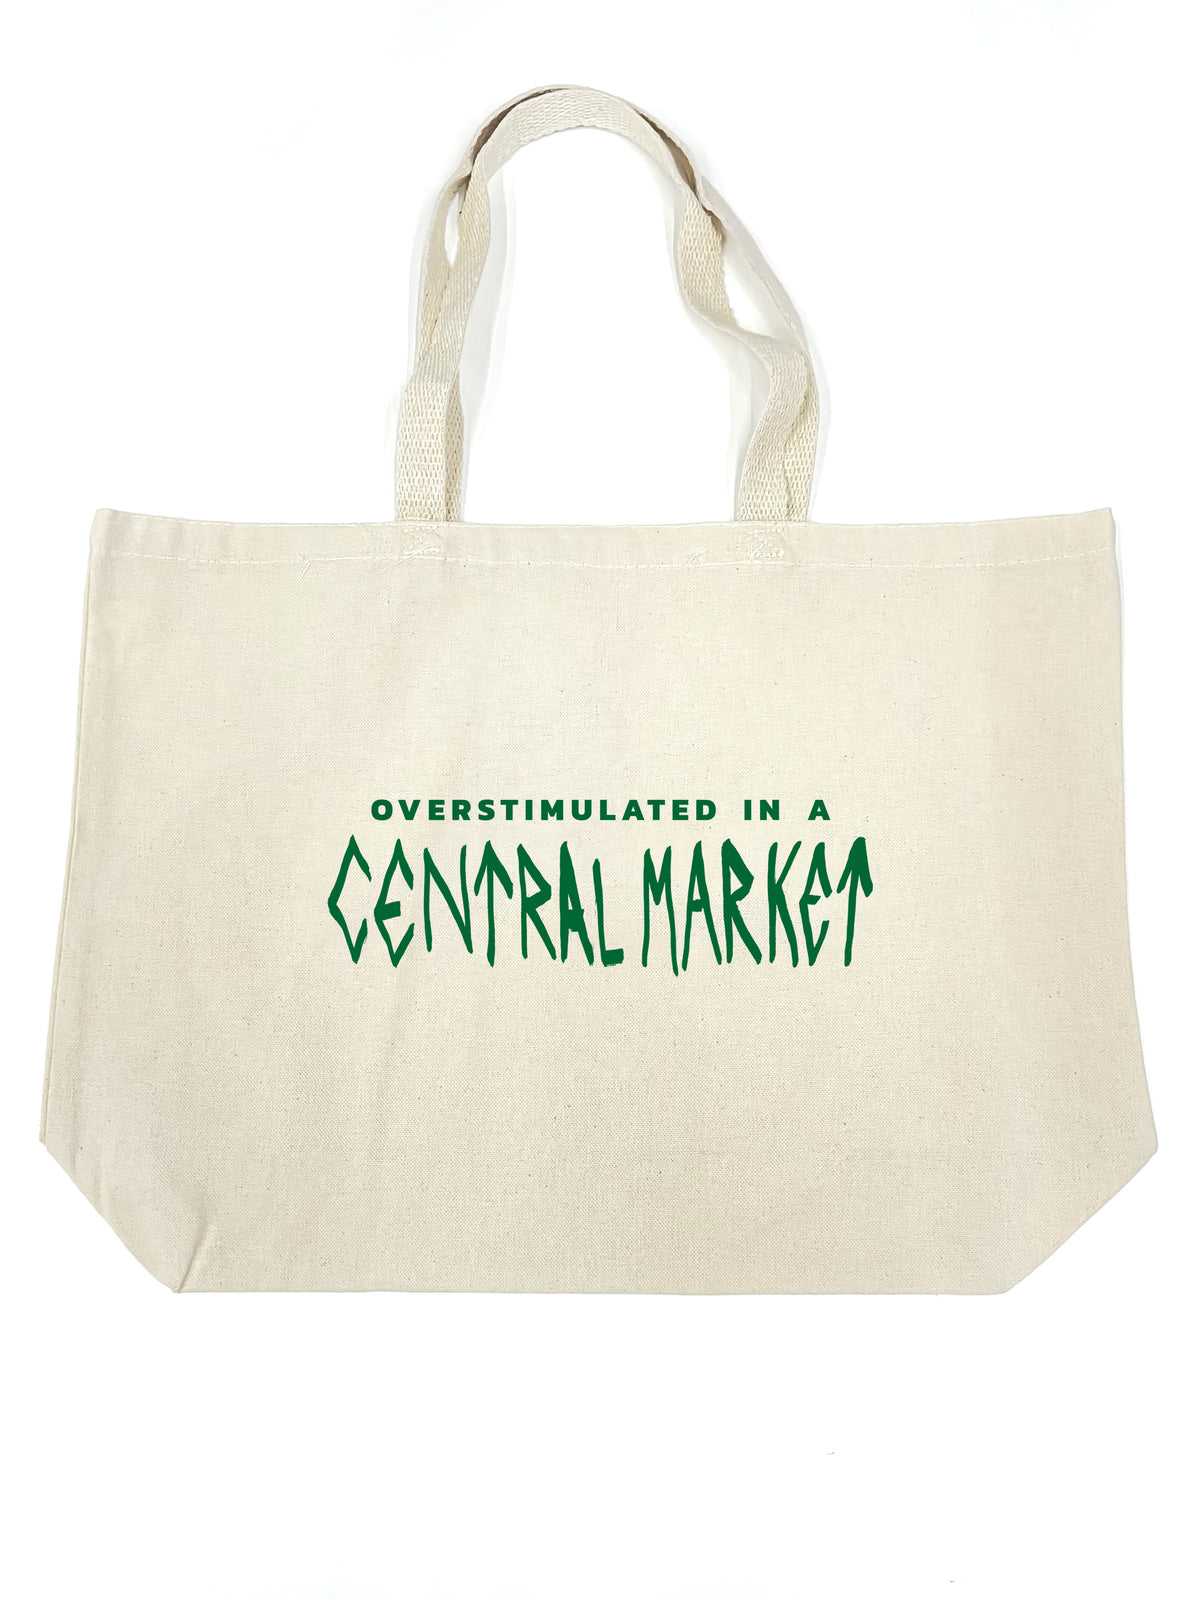 Overstimulated in a Central Market Tote by Dirty Laundry